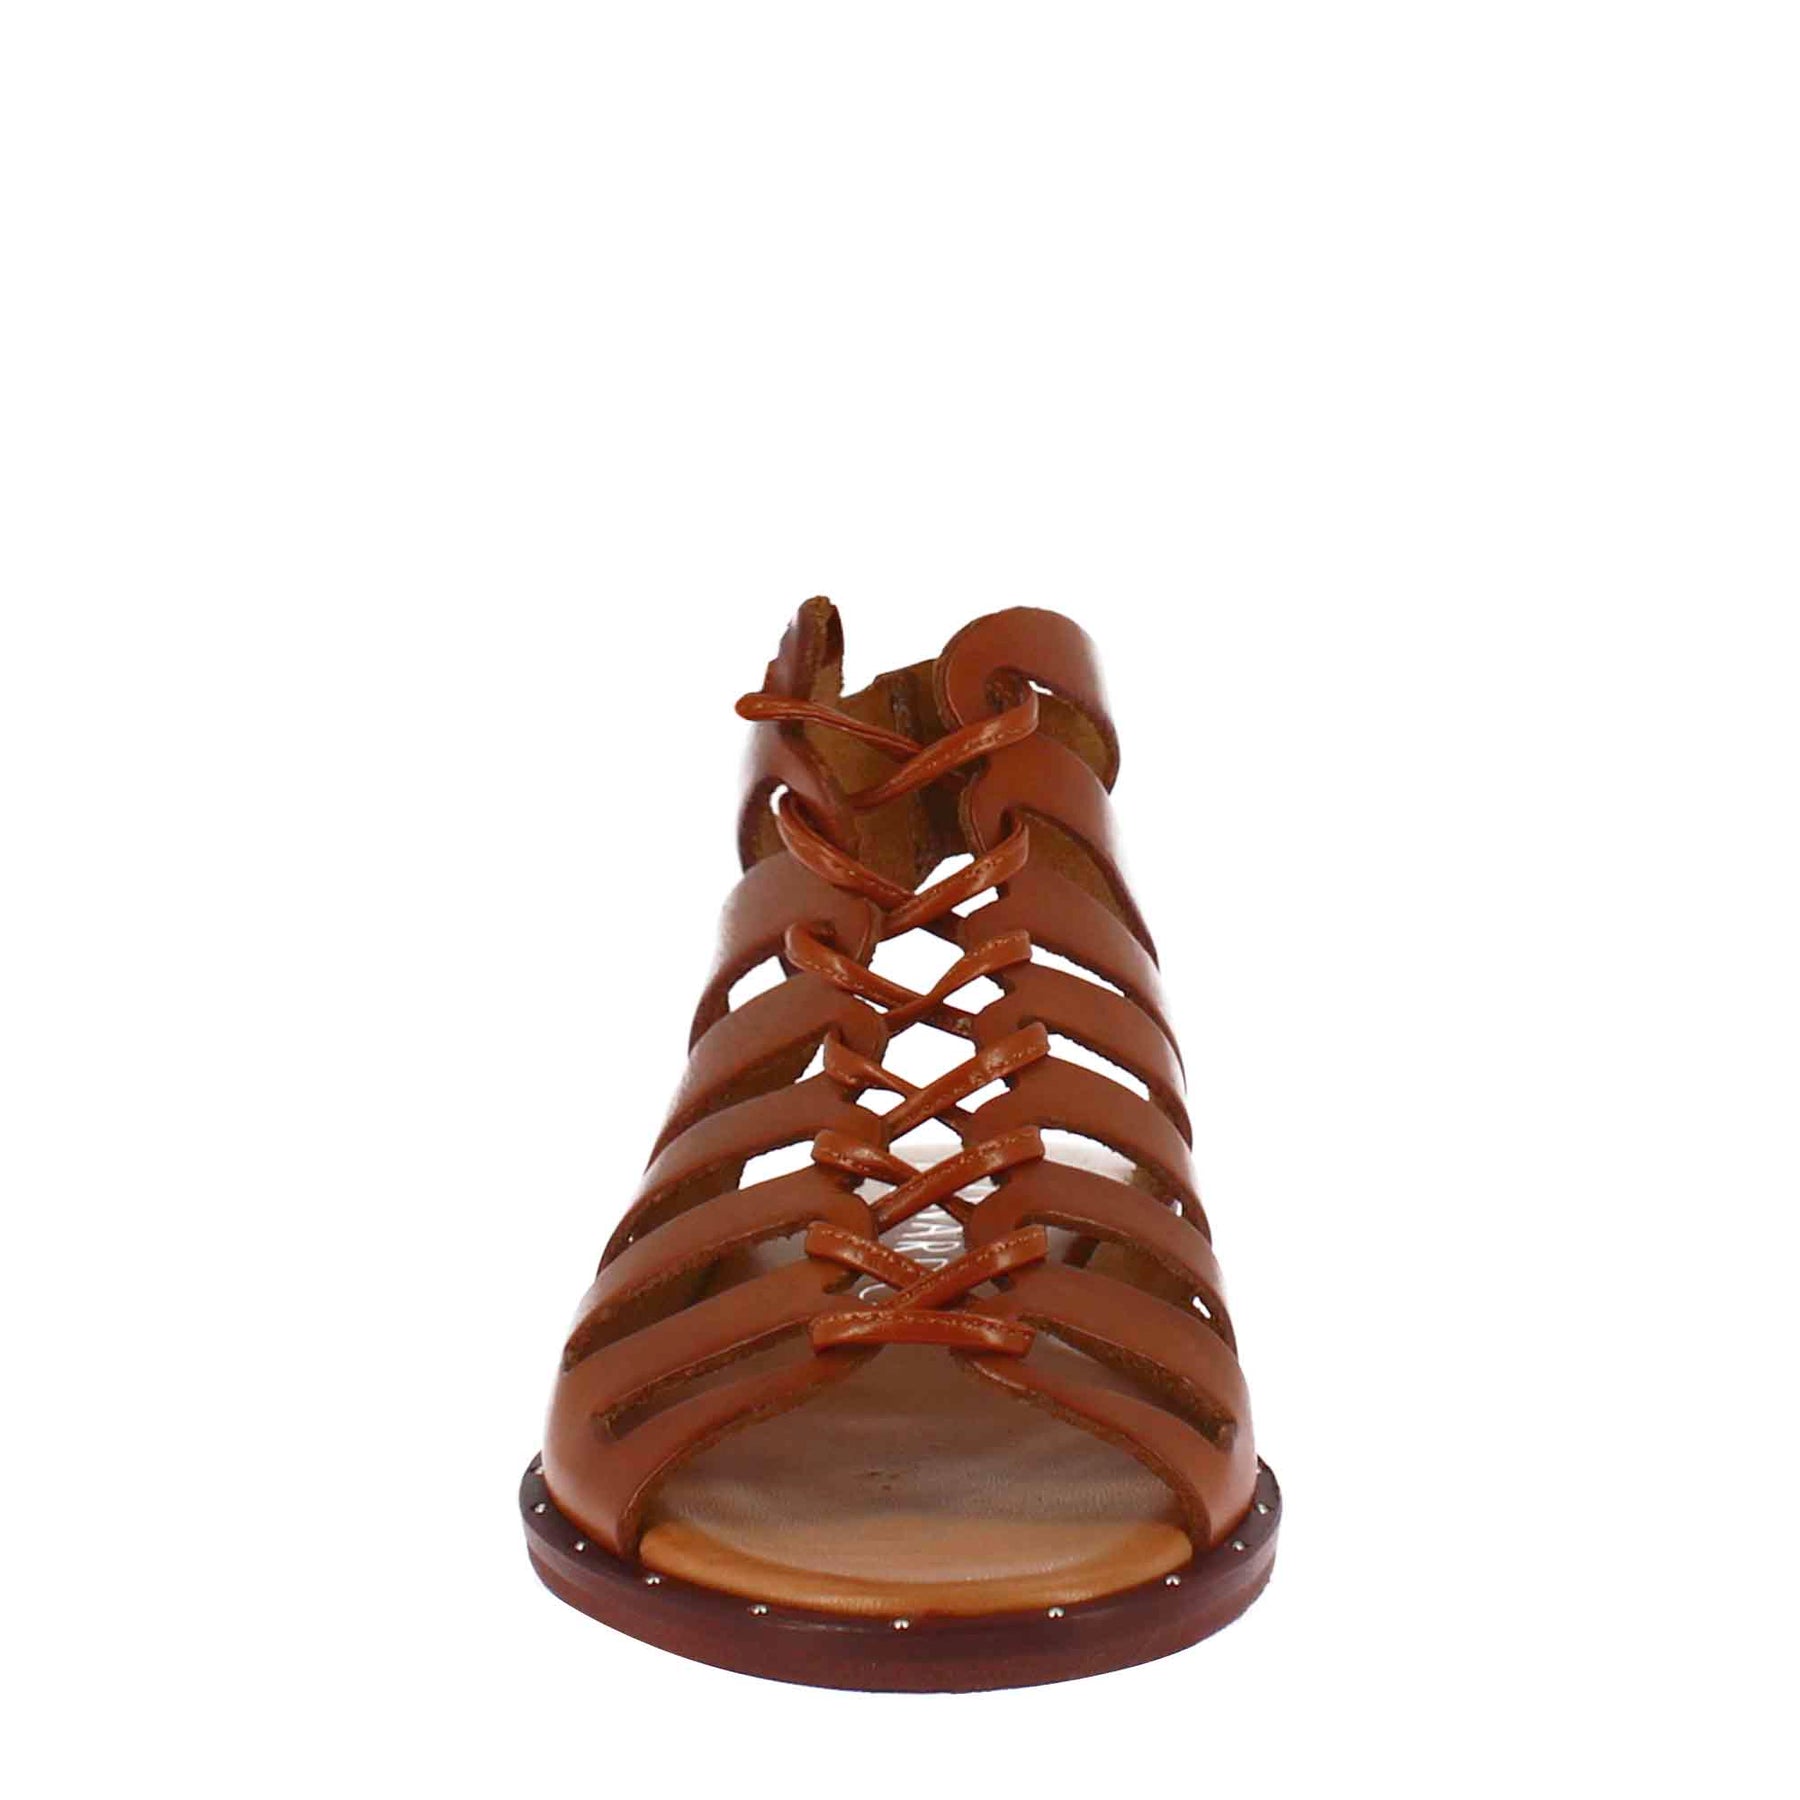 Women's gladiator sandal with handmade laces in brown leather